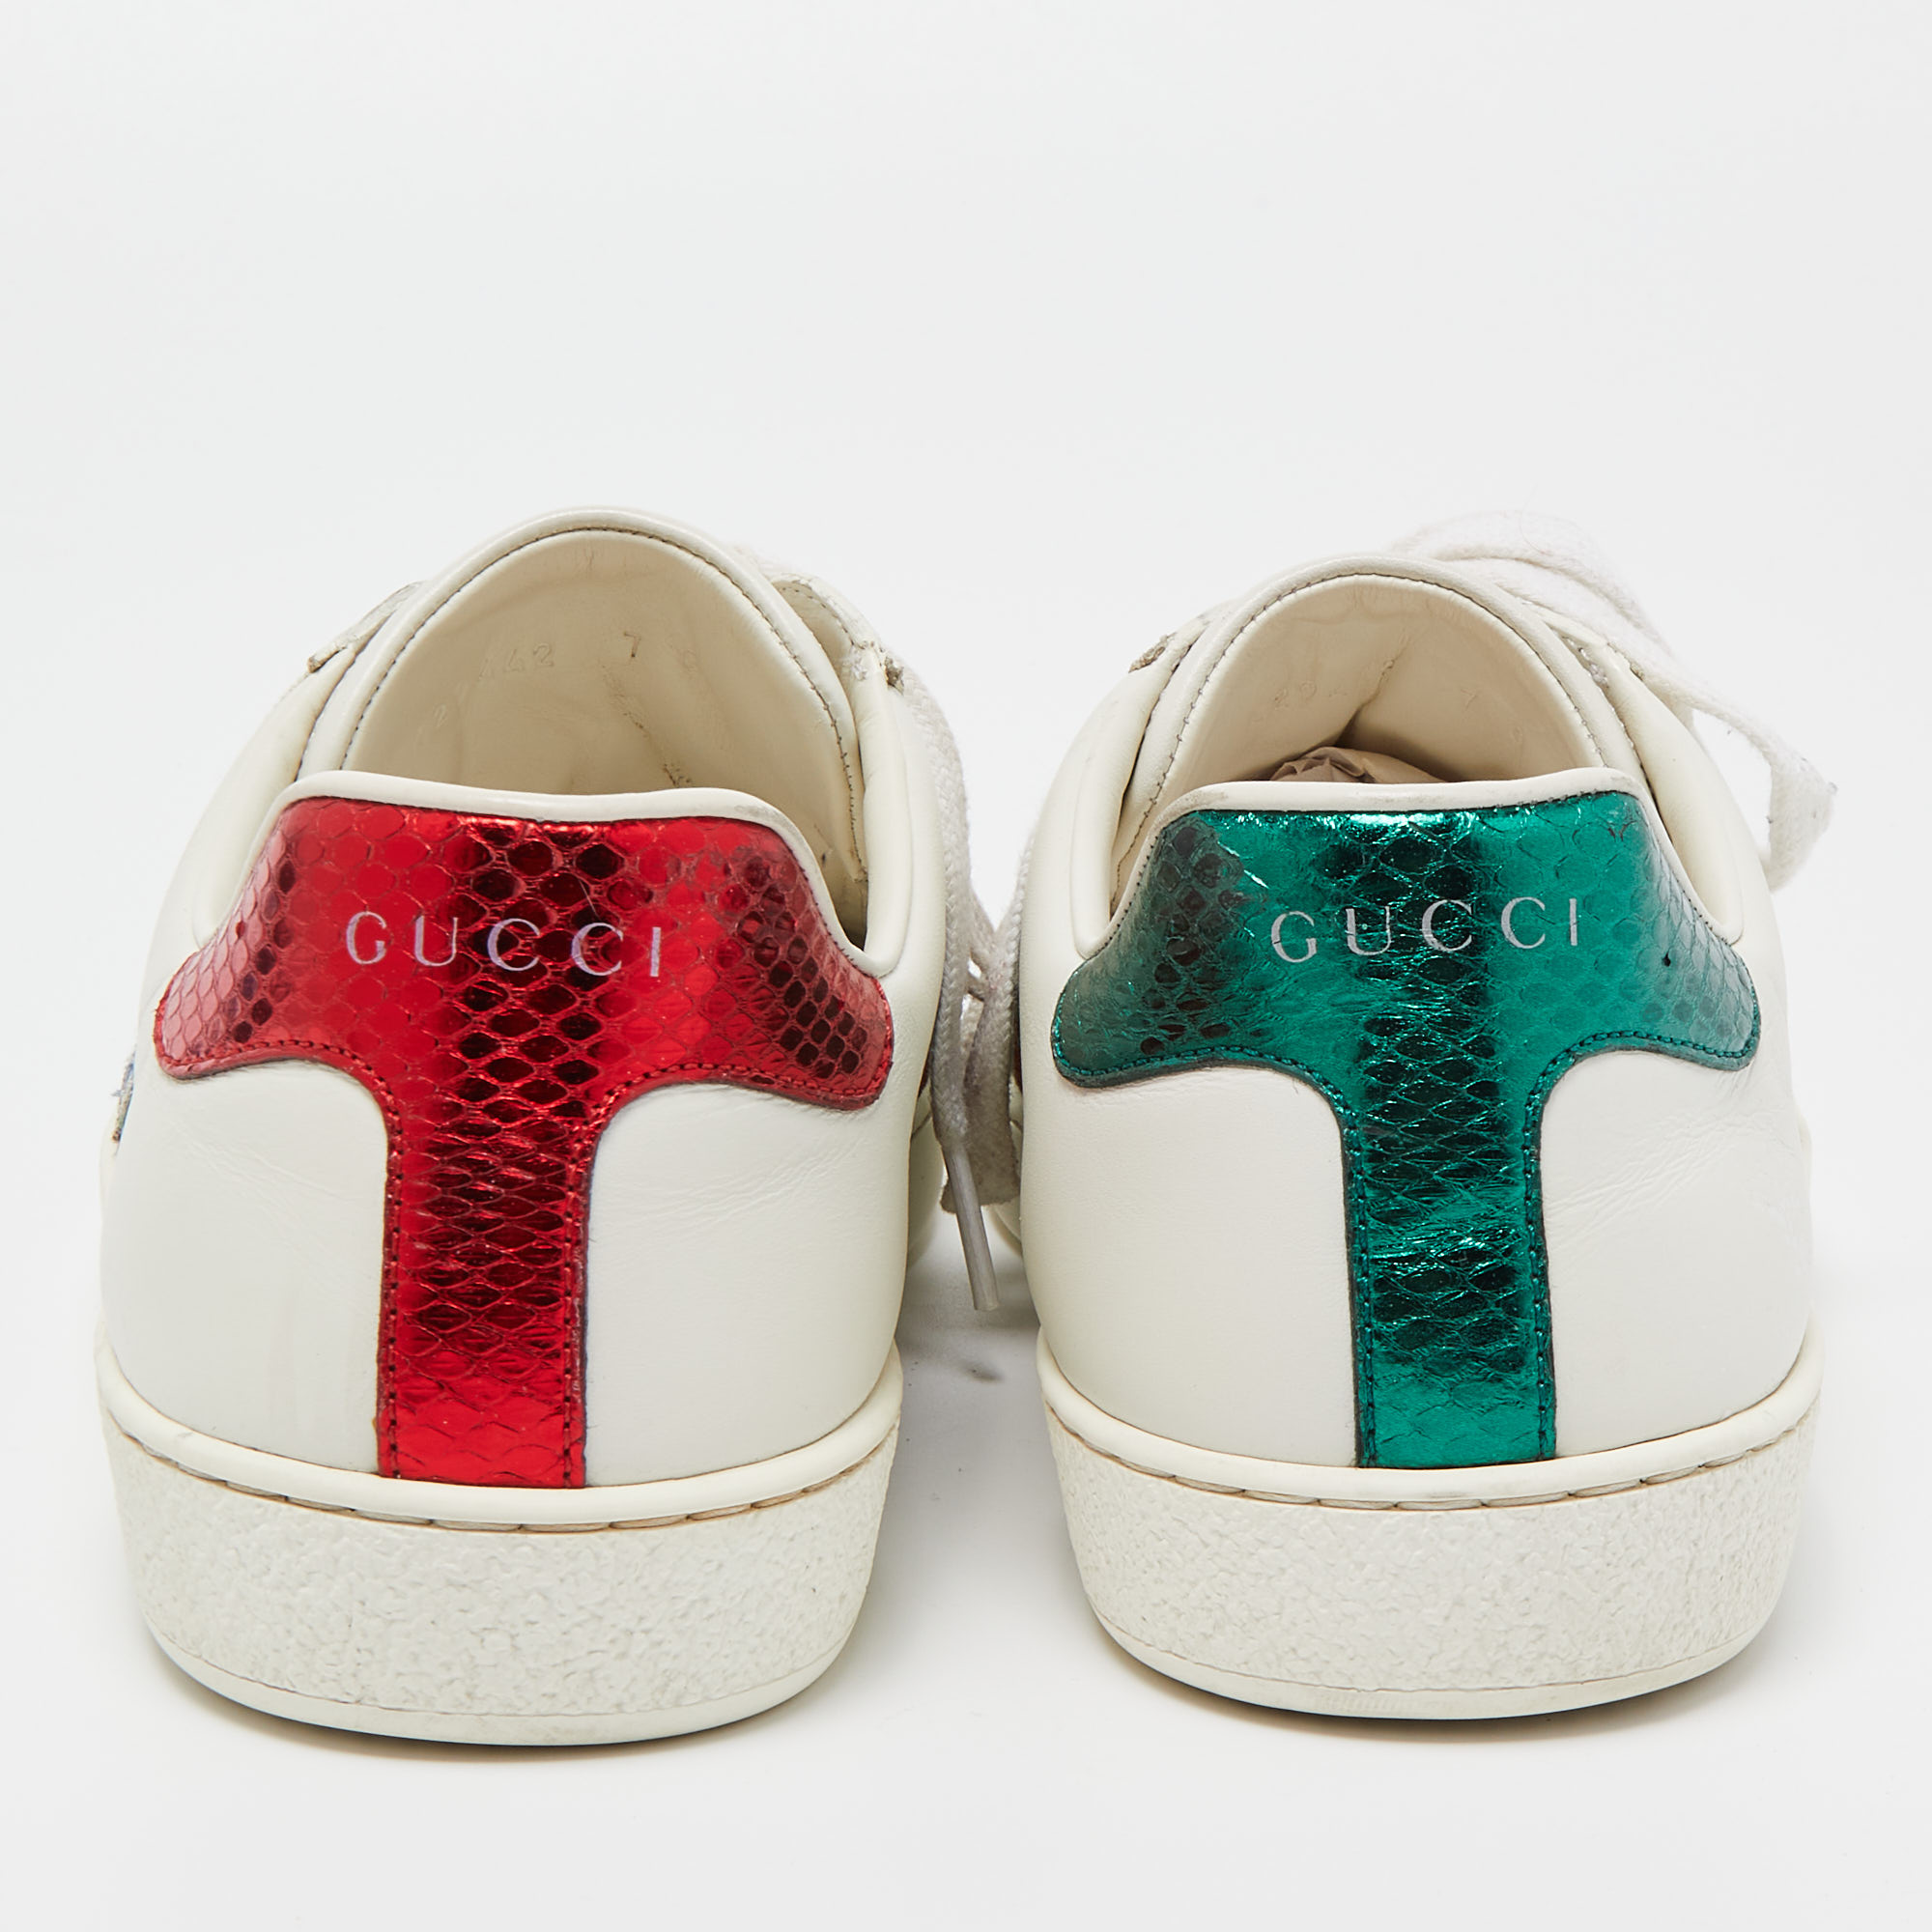 Gucci White Leather Ace Low Top Sneakers Size 41